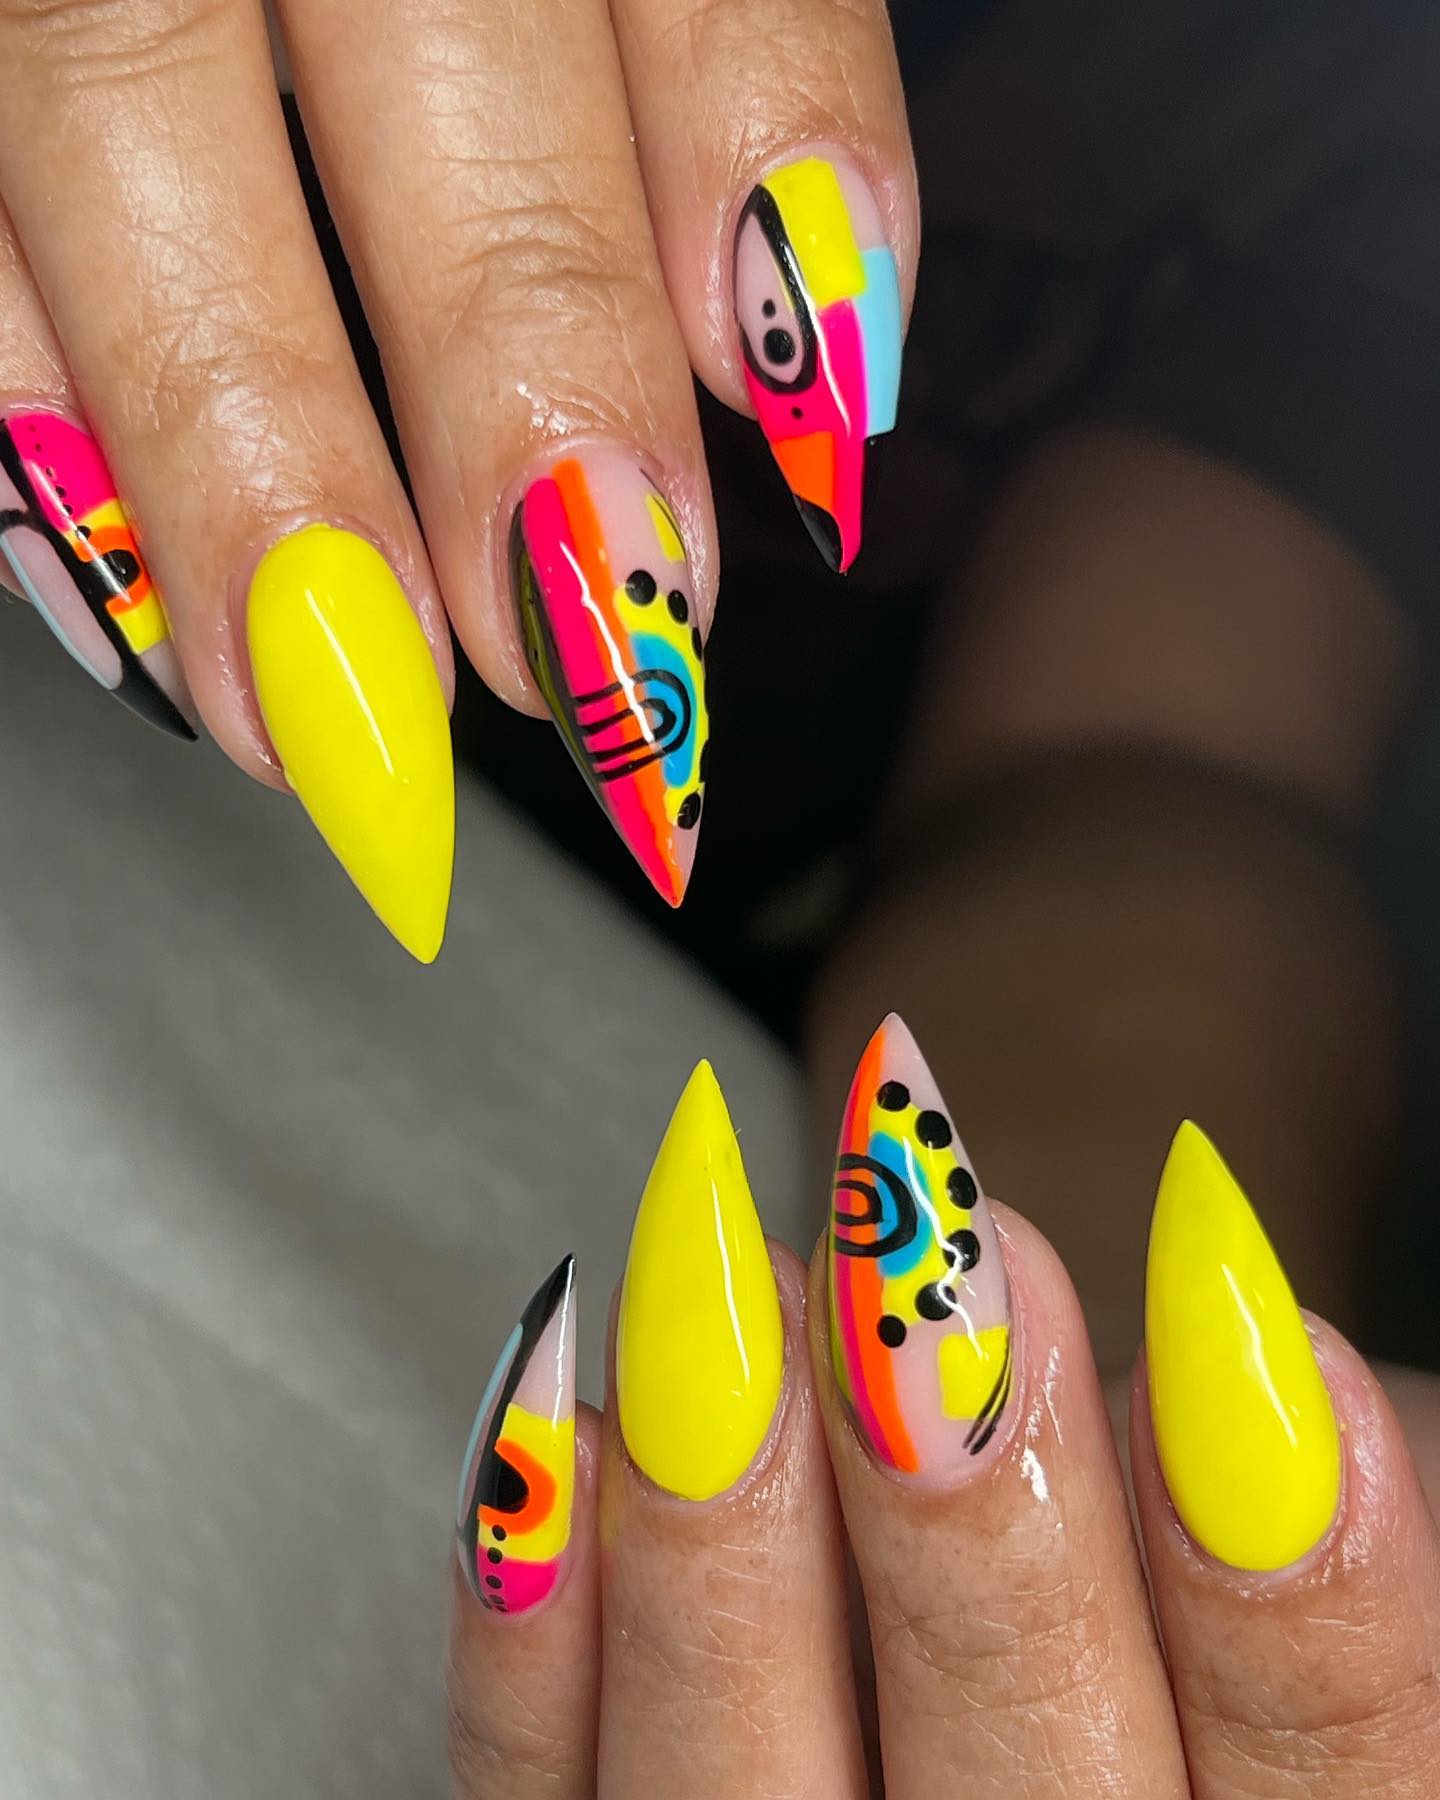 Abstract nail art is about some shapes, lines and dots. Whether it has a meaning or not, your stiletto nails will look amazing.